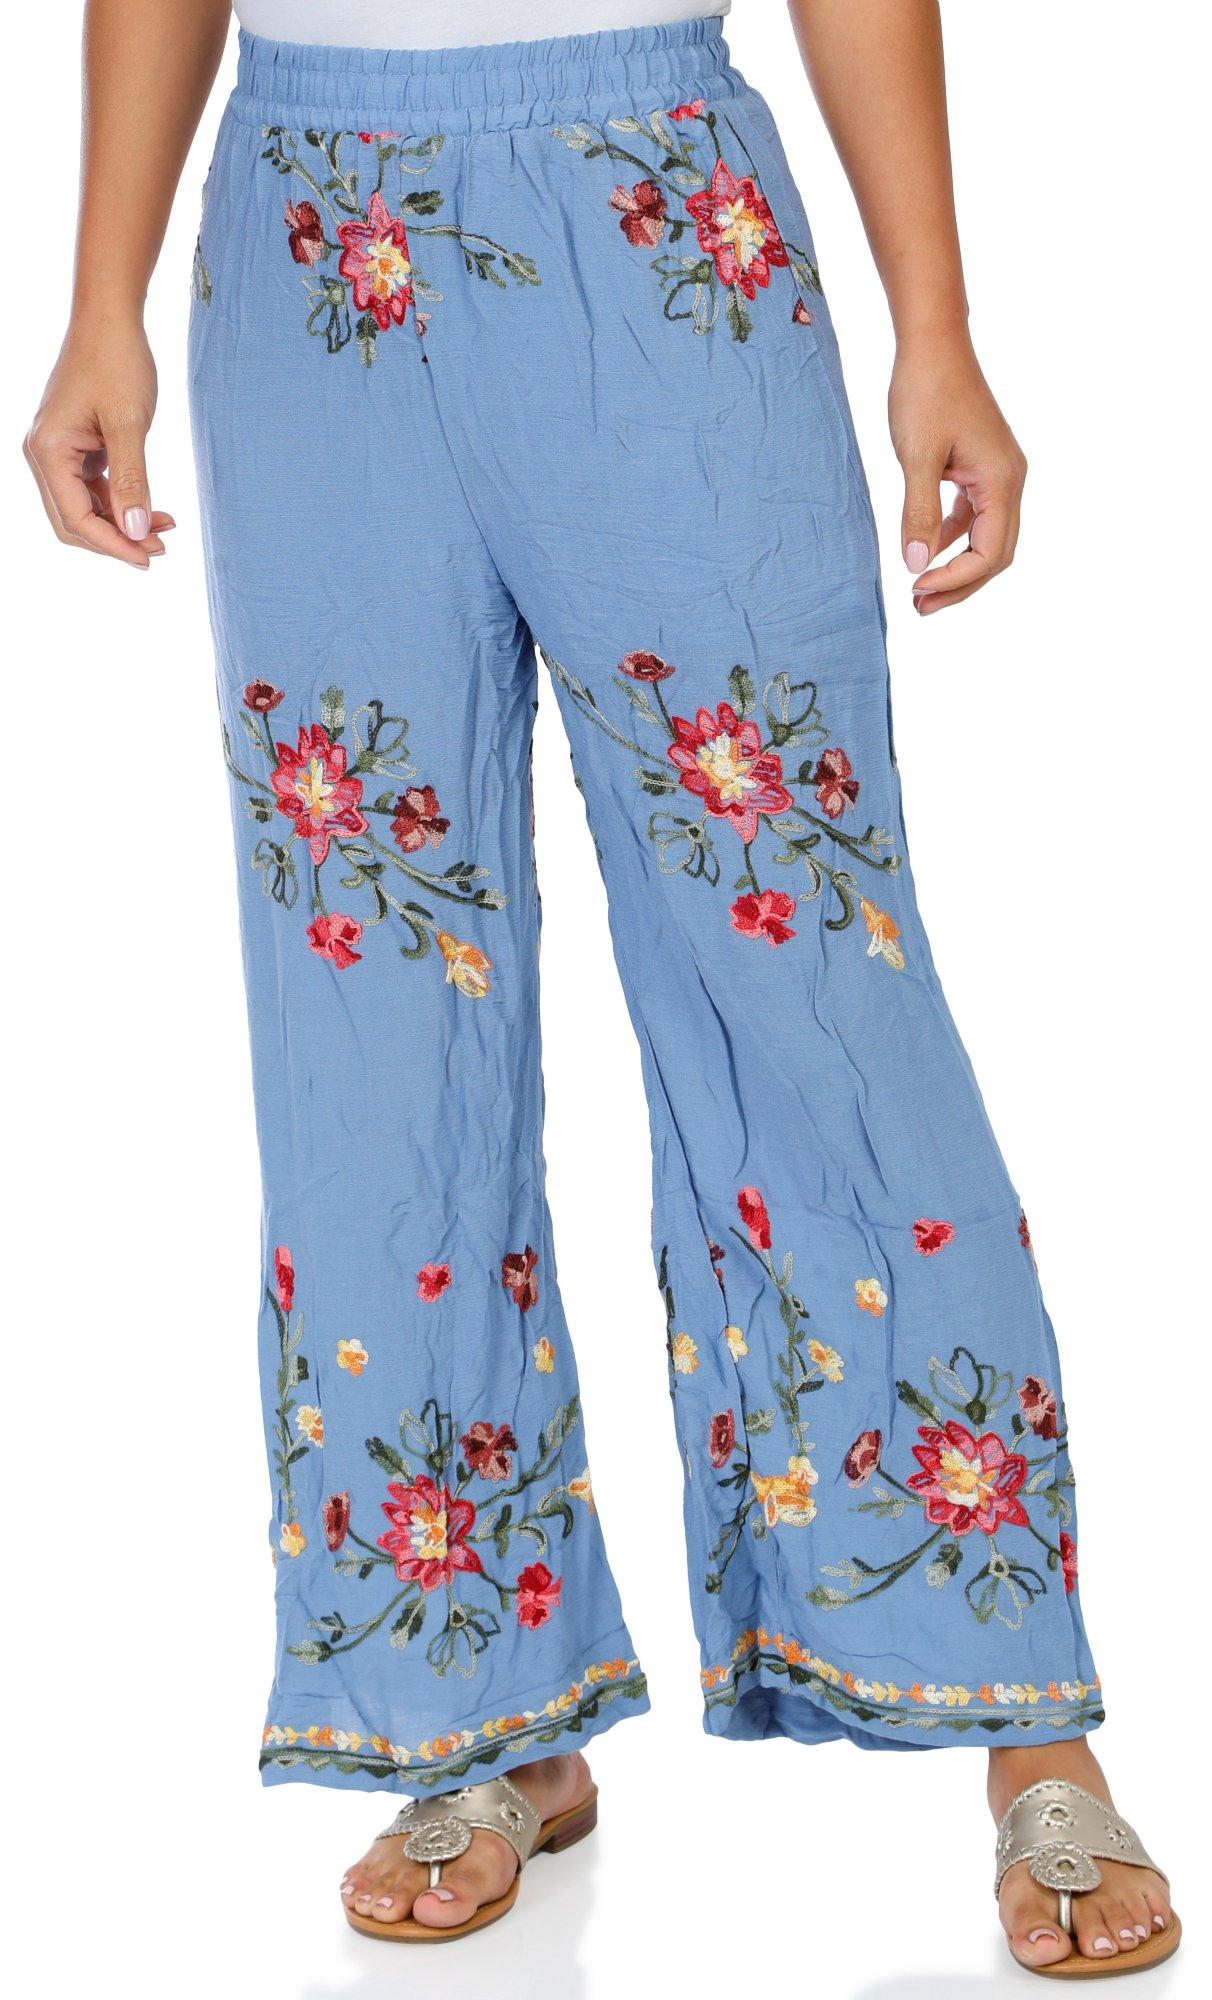 Women's Embroidered Floral Wide Leg Pants